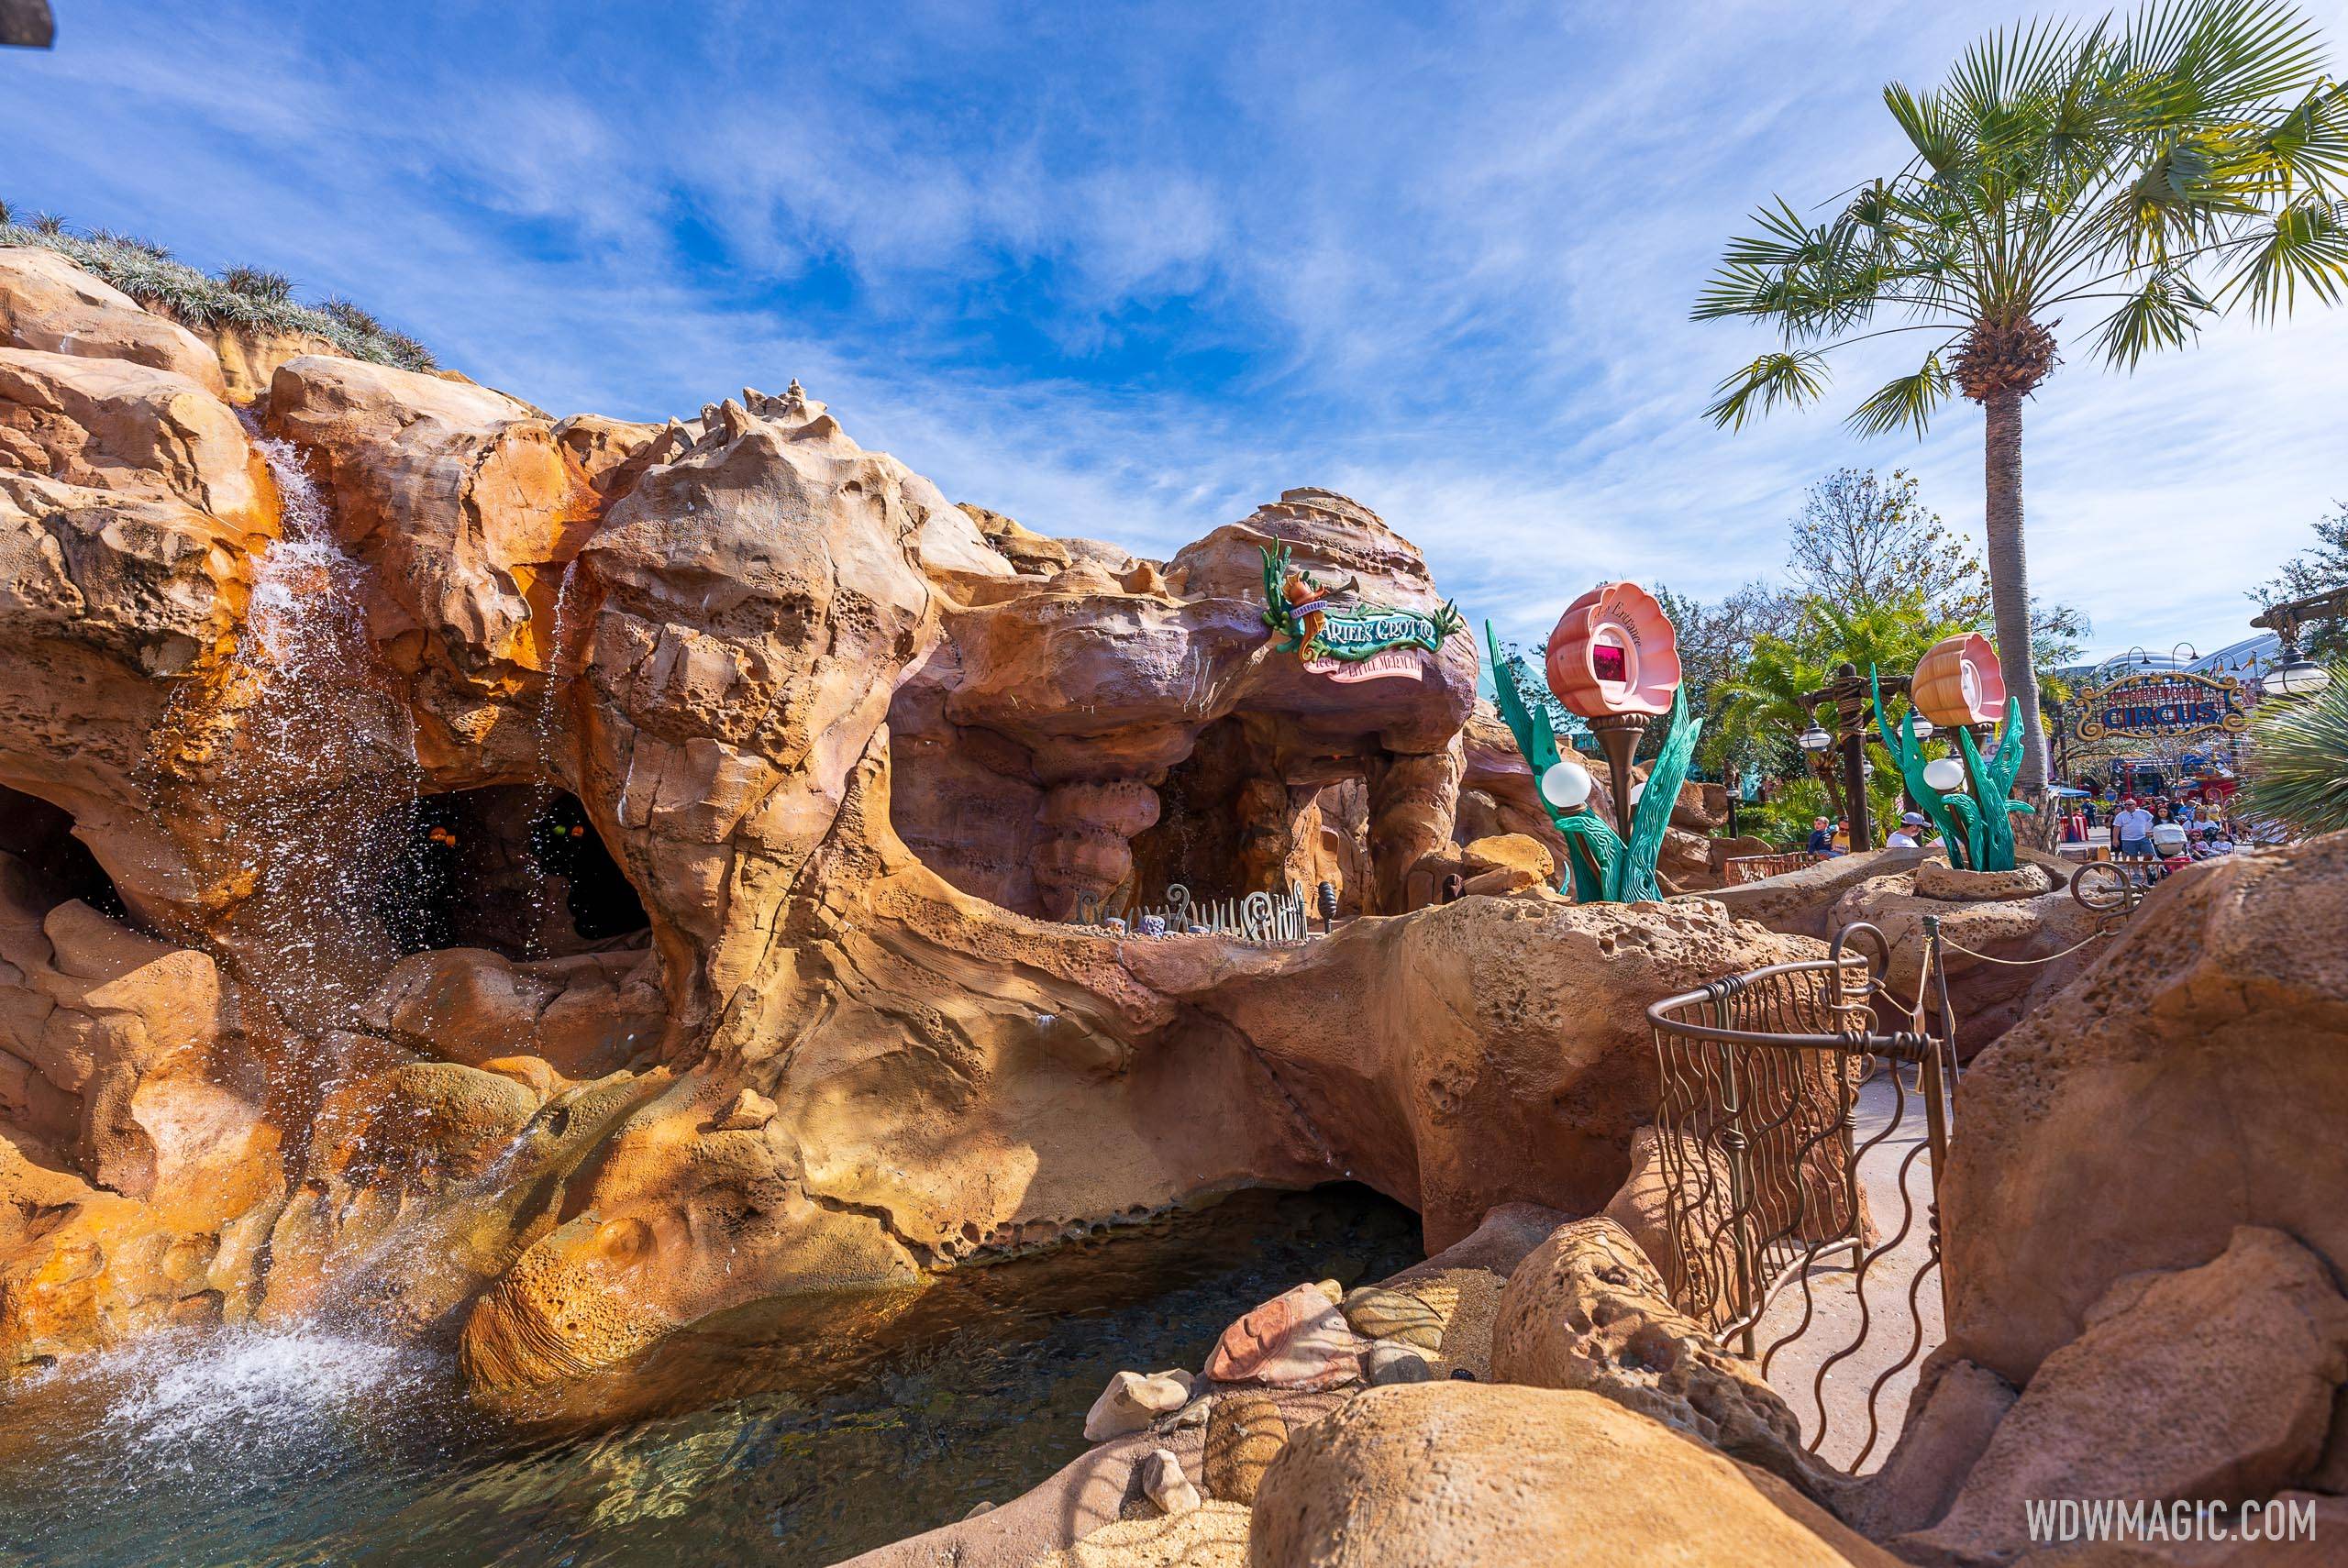 Ariel's Grotto will reopen January 22 at Walt Disney World